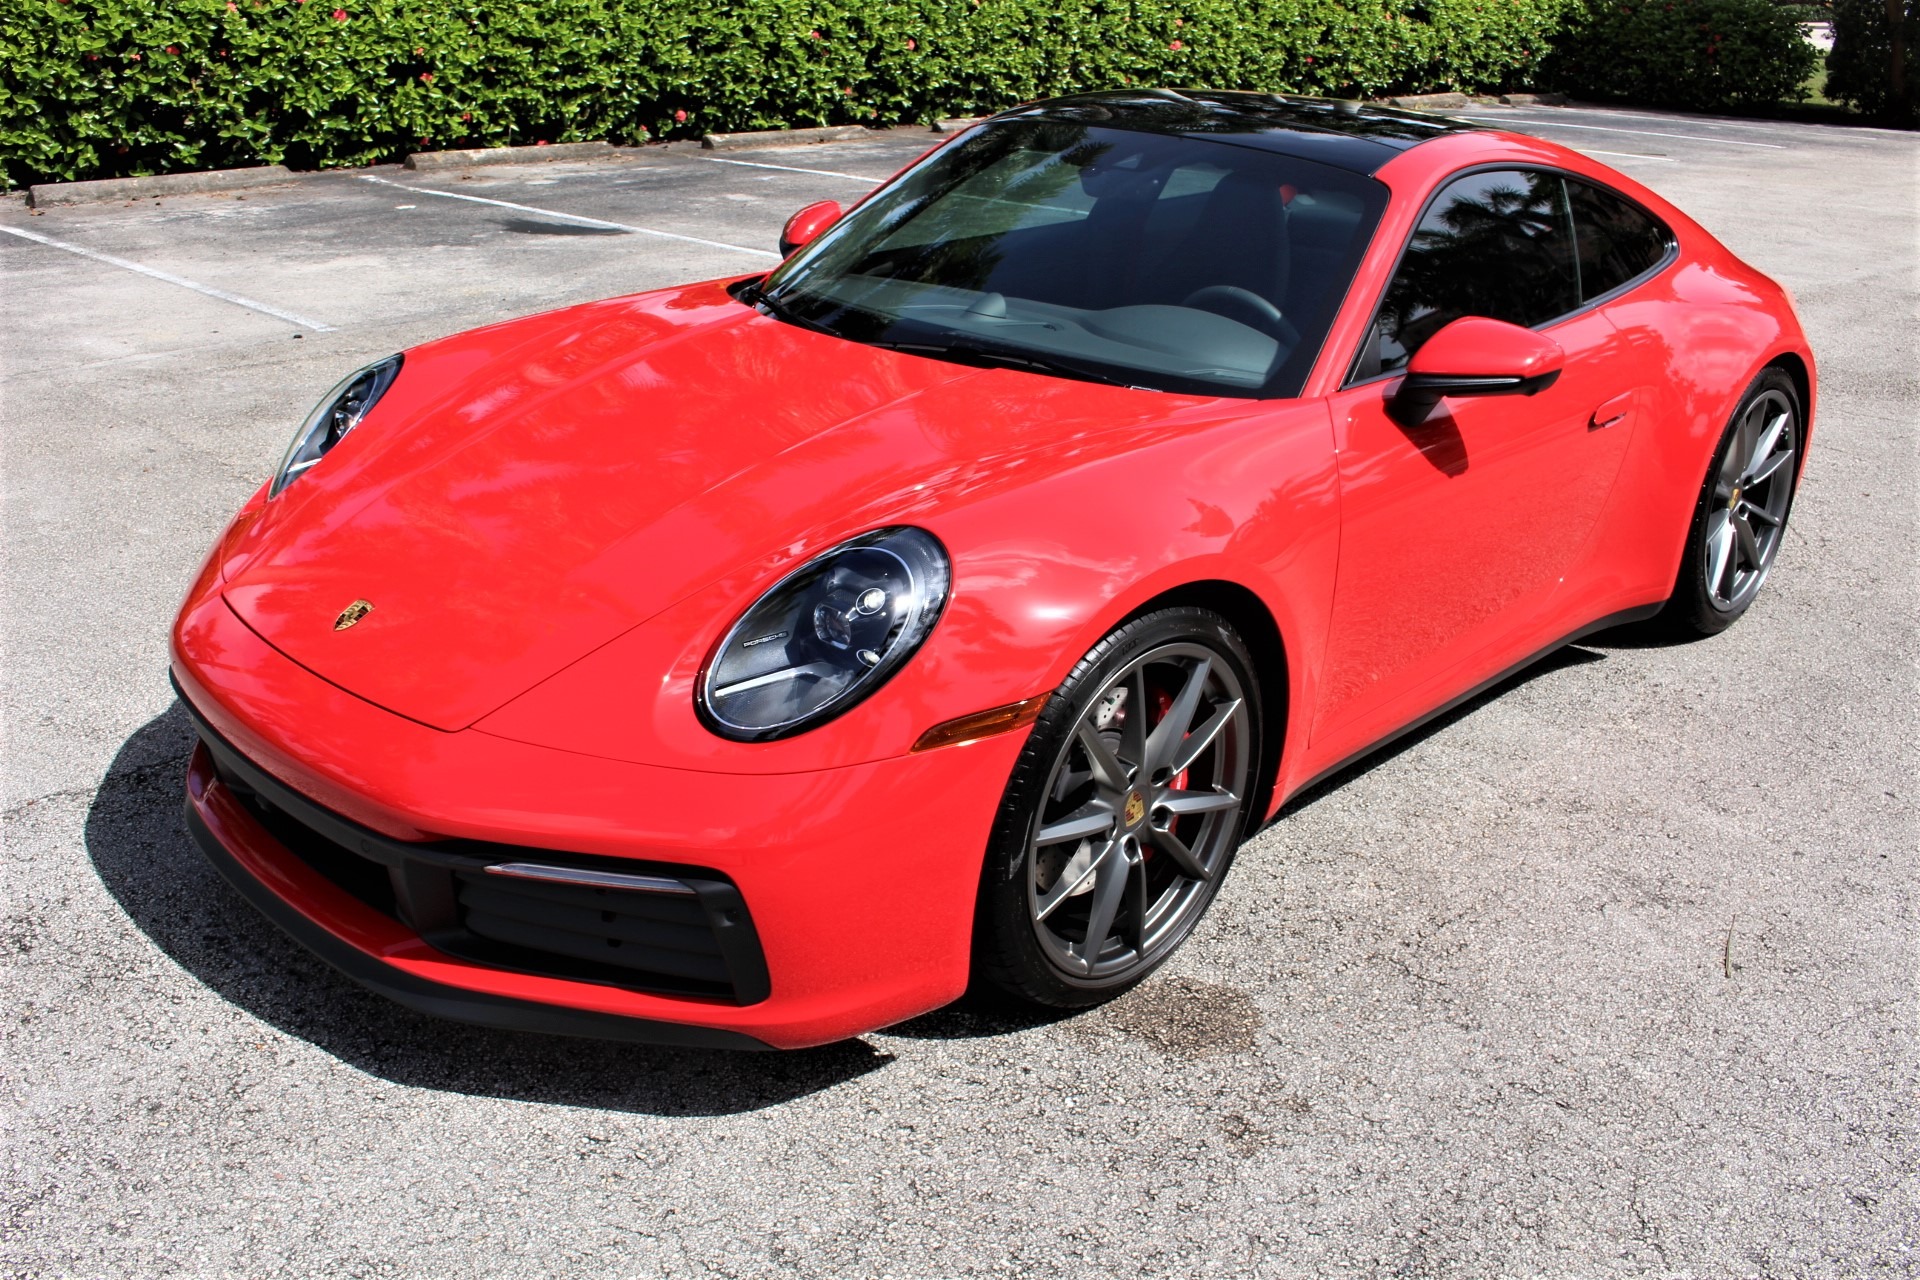 Used 2021 Porsche 911 Carrera S for sale Sold at The Gables Sports Cars in Miami FL 33146 3